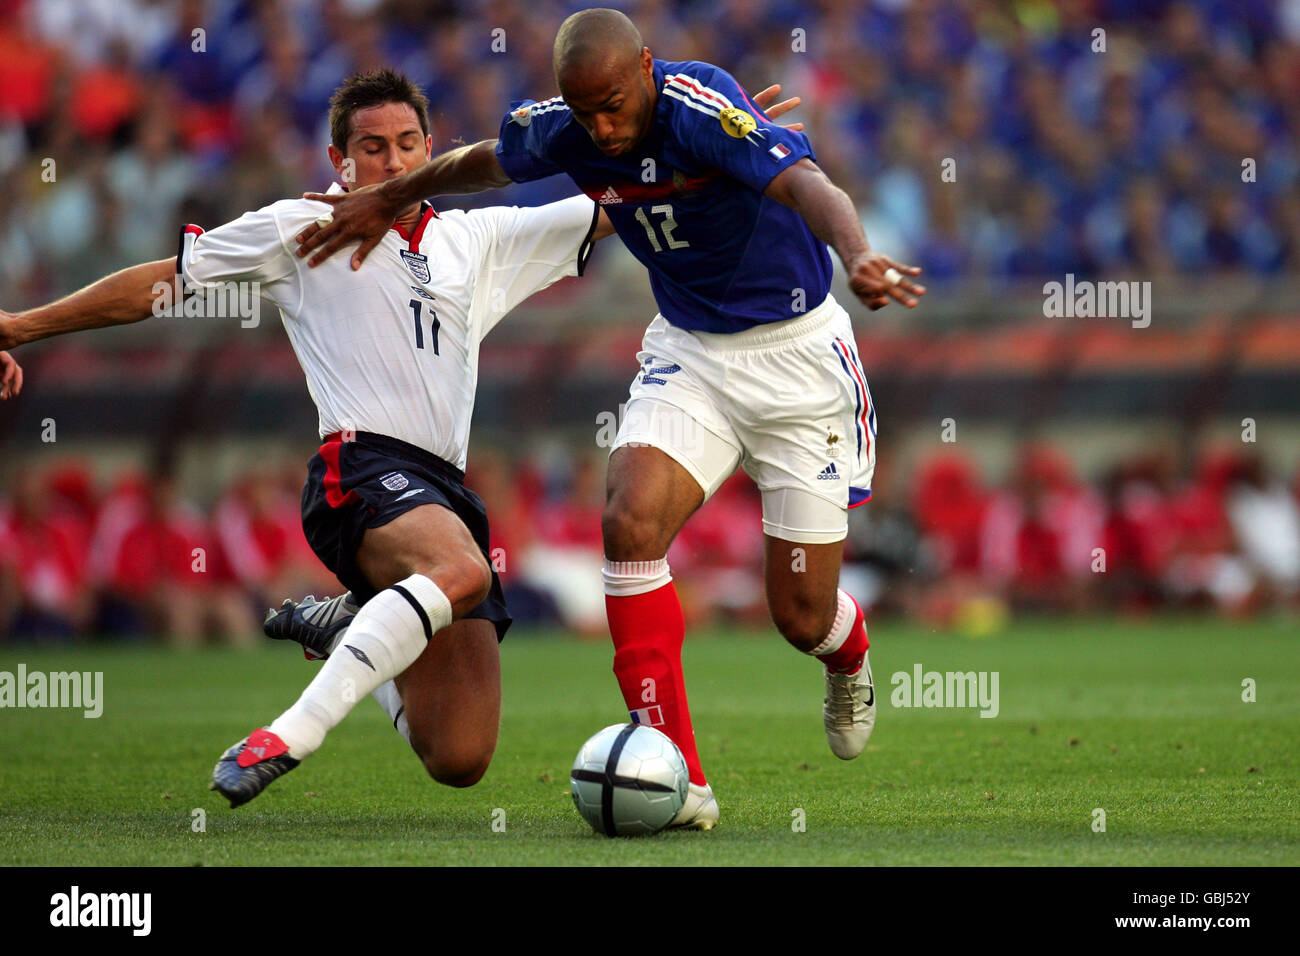 Soccer - UEFA European Championship 2004 - Group B - France v England. France's Thierry Henry and England's Frank Lampard battle for the ball Stock Photo